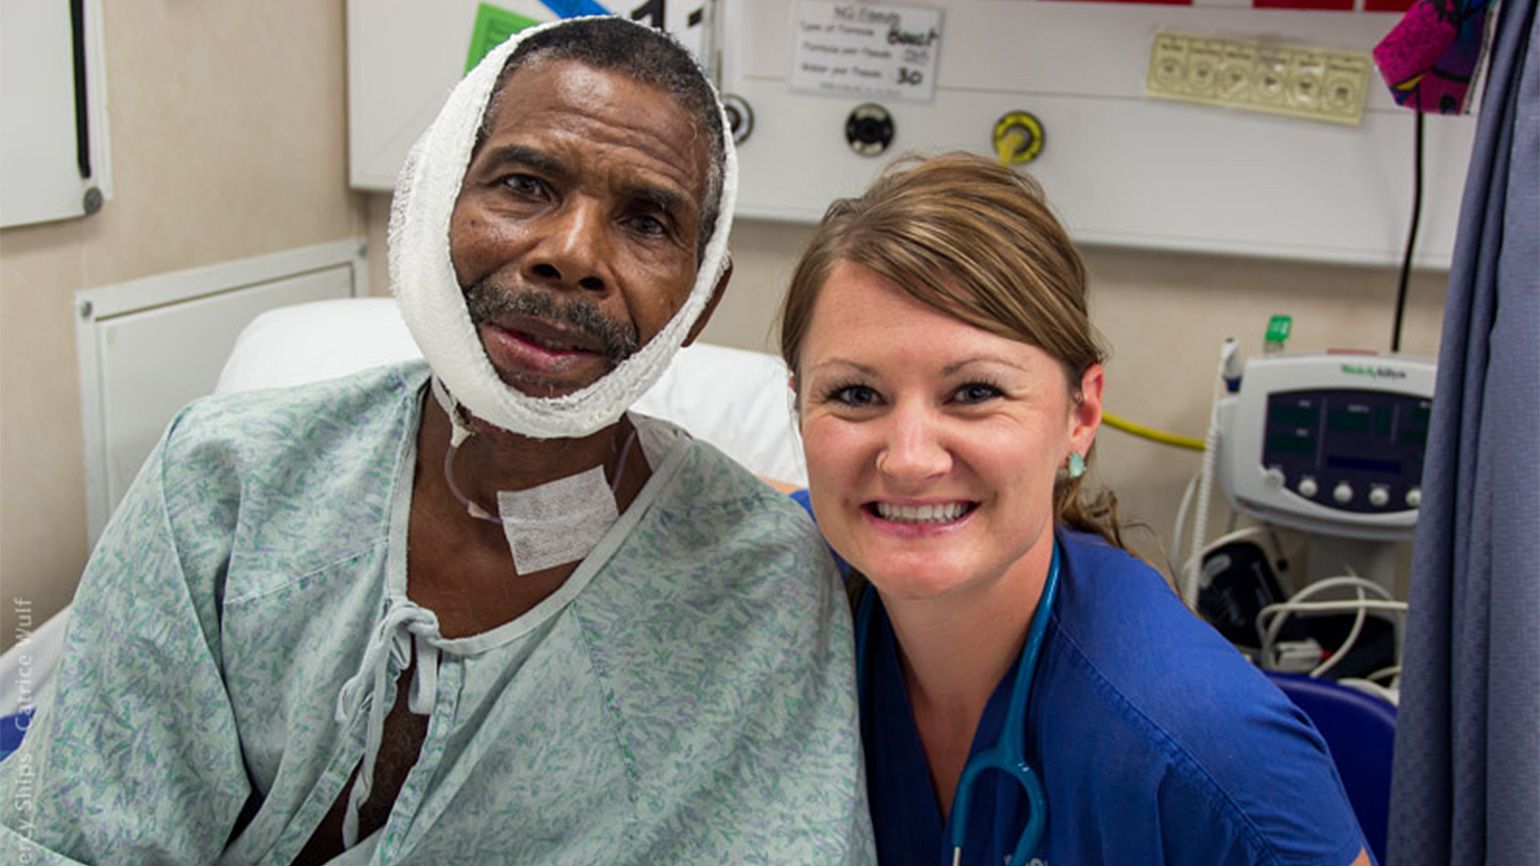 Heather poses with William, one of her patients, who taught her a lesson about healing